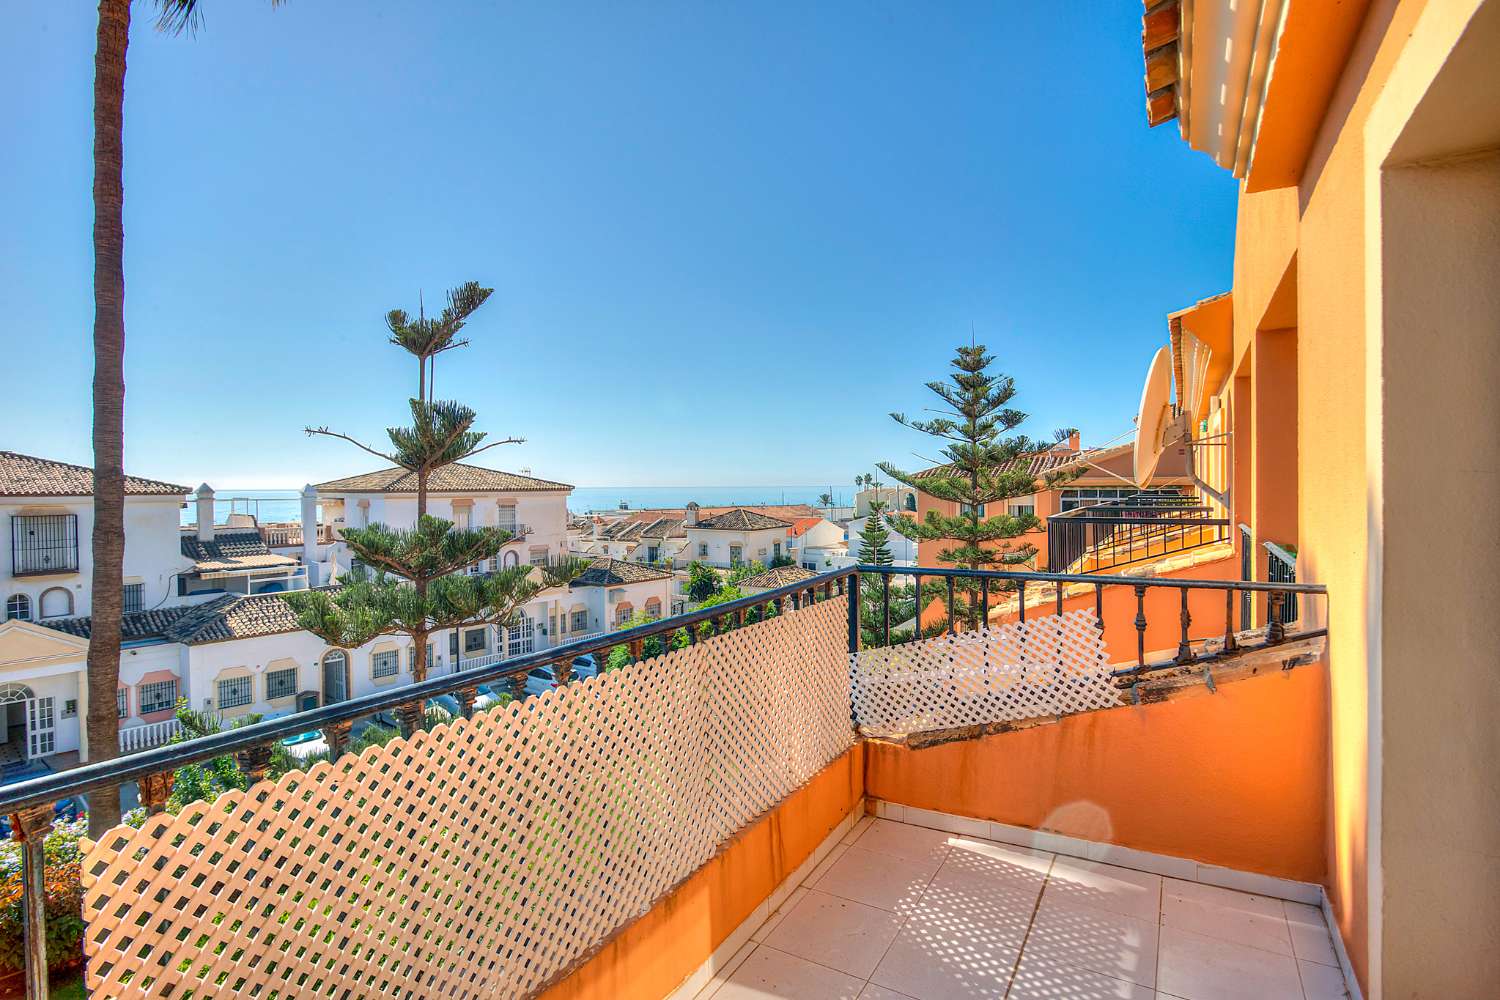 Fantastic Duplex located just 200 meters from the beach